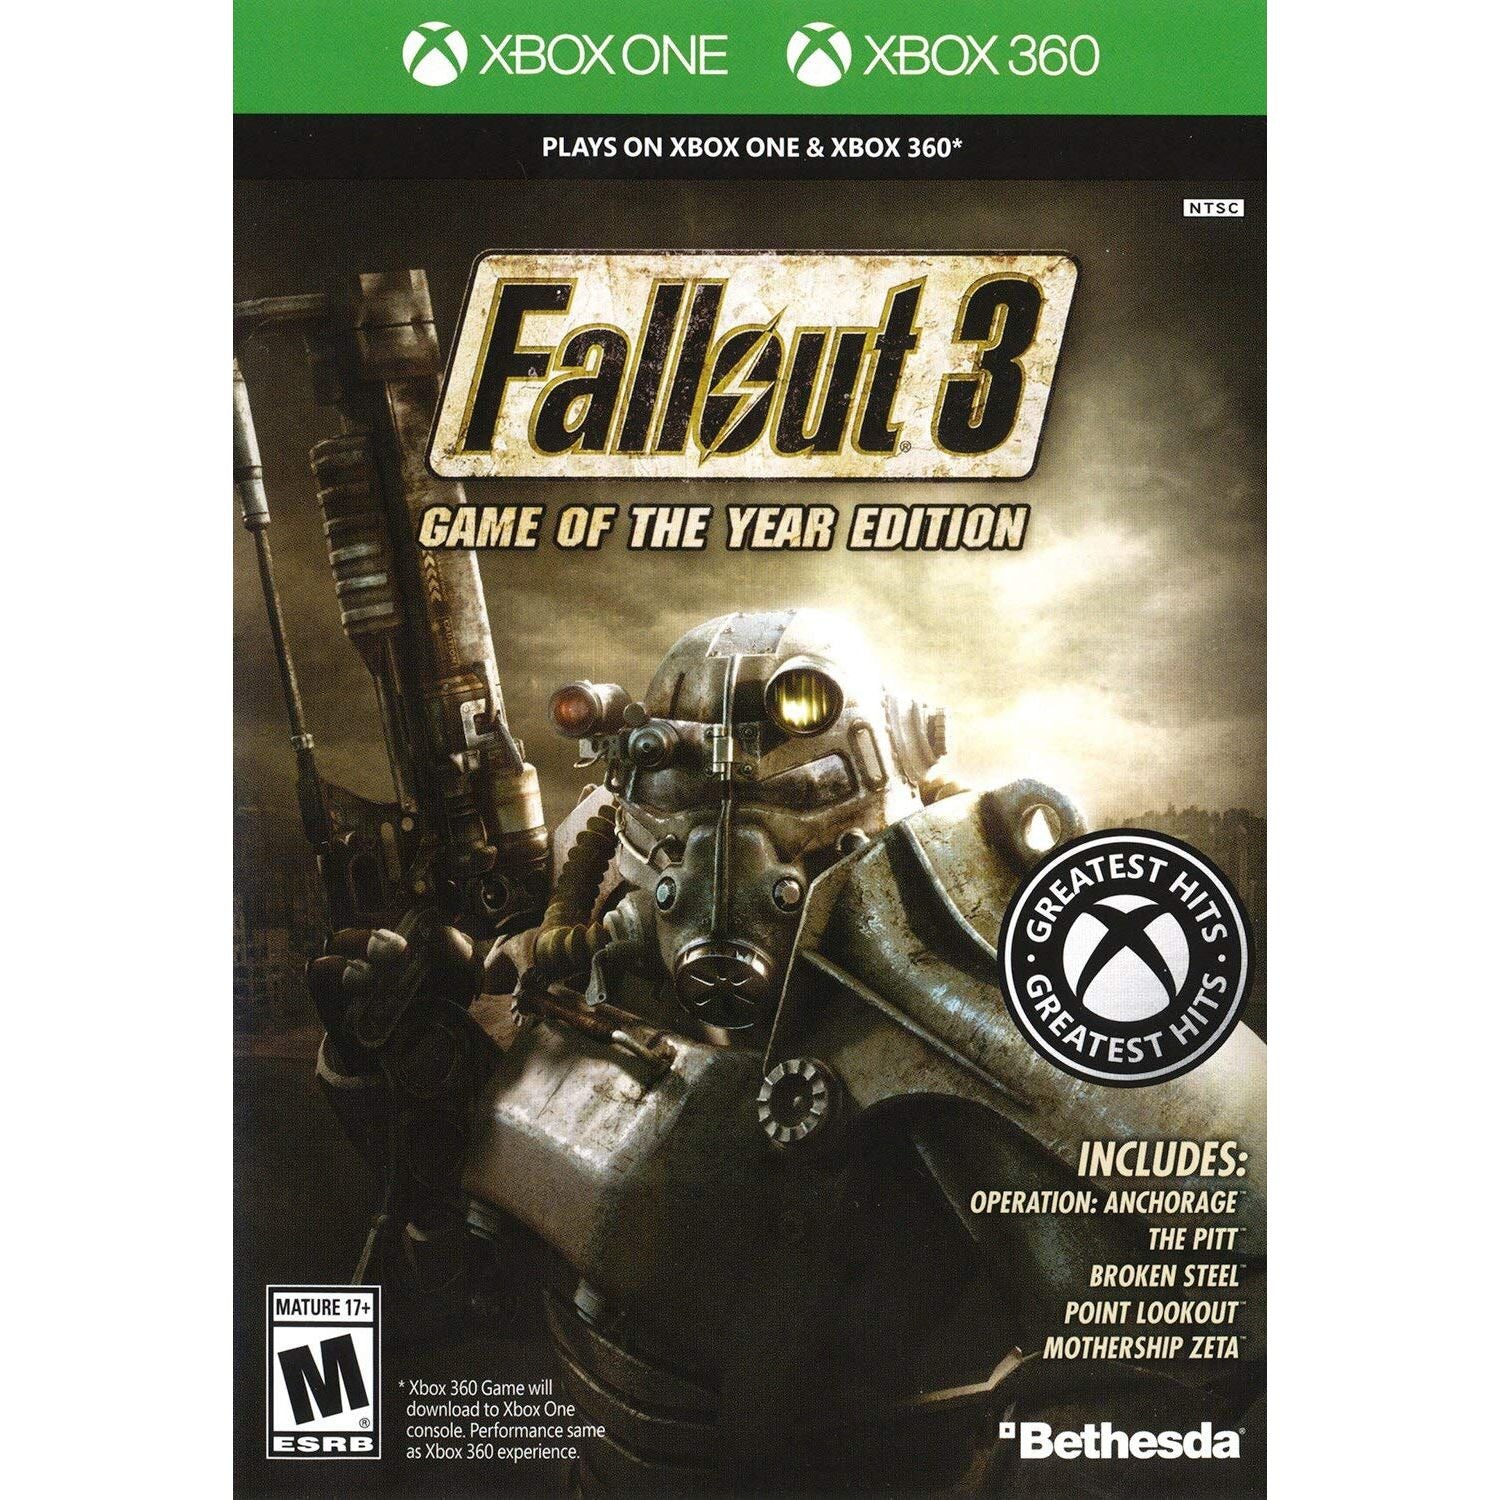 XBOX ONE - Fallout 3 Game of the Year Edition